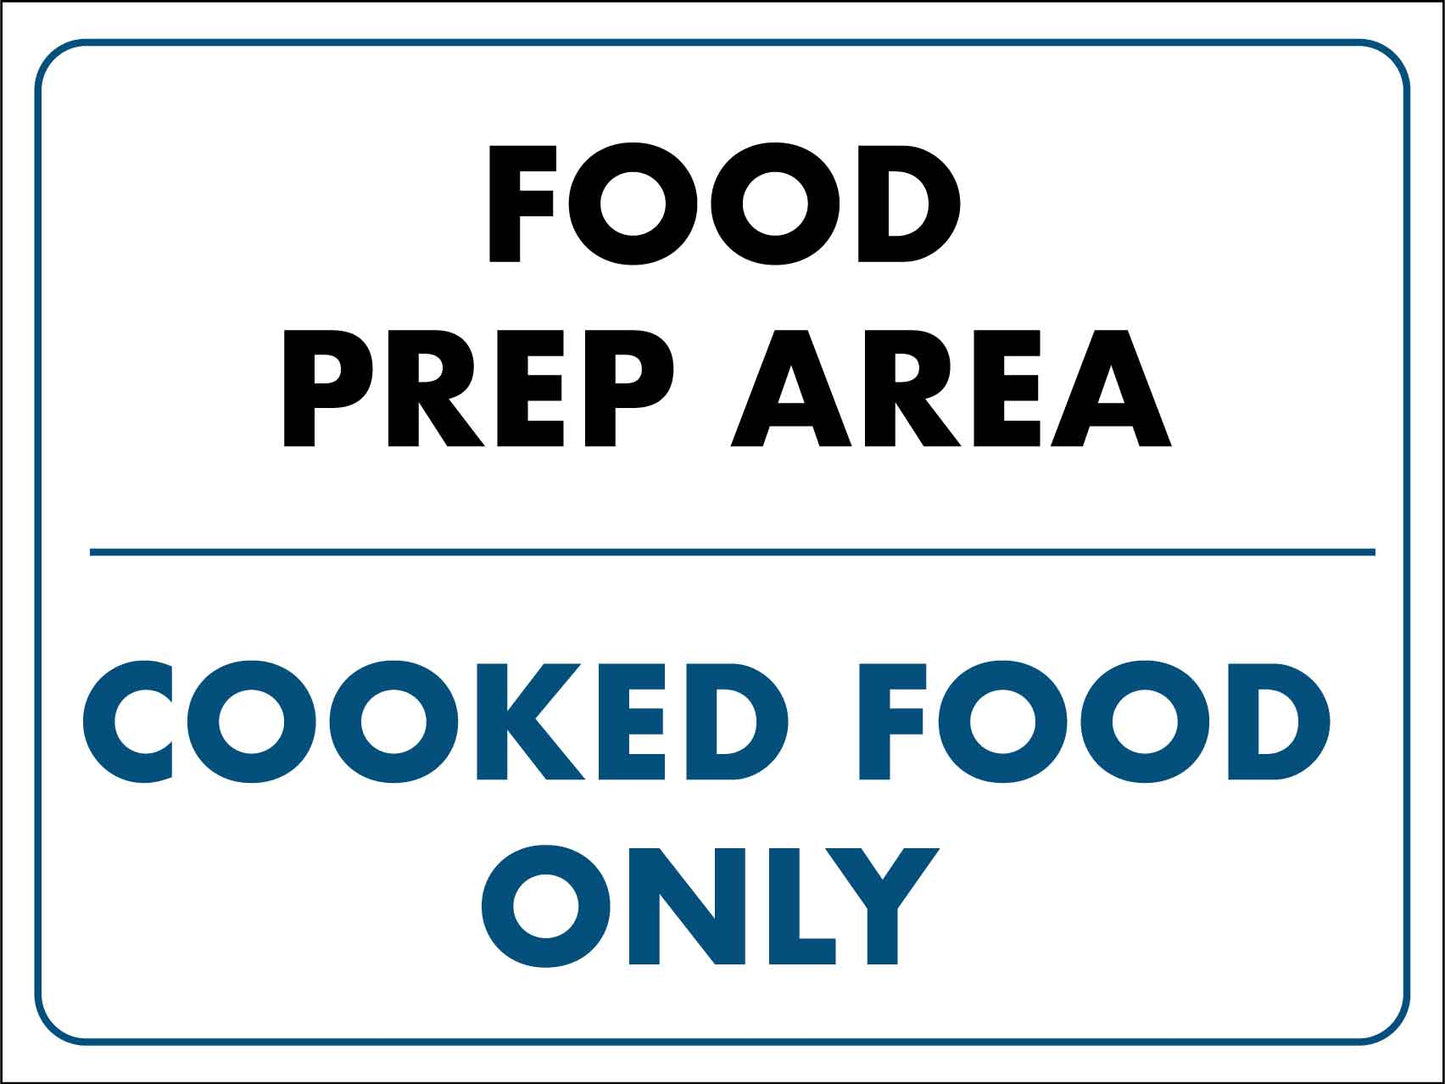 Food Prep Area Cooked Food Only Sign